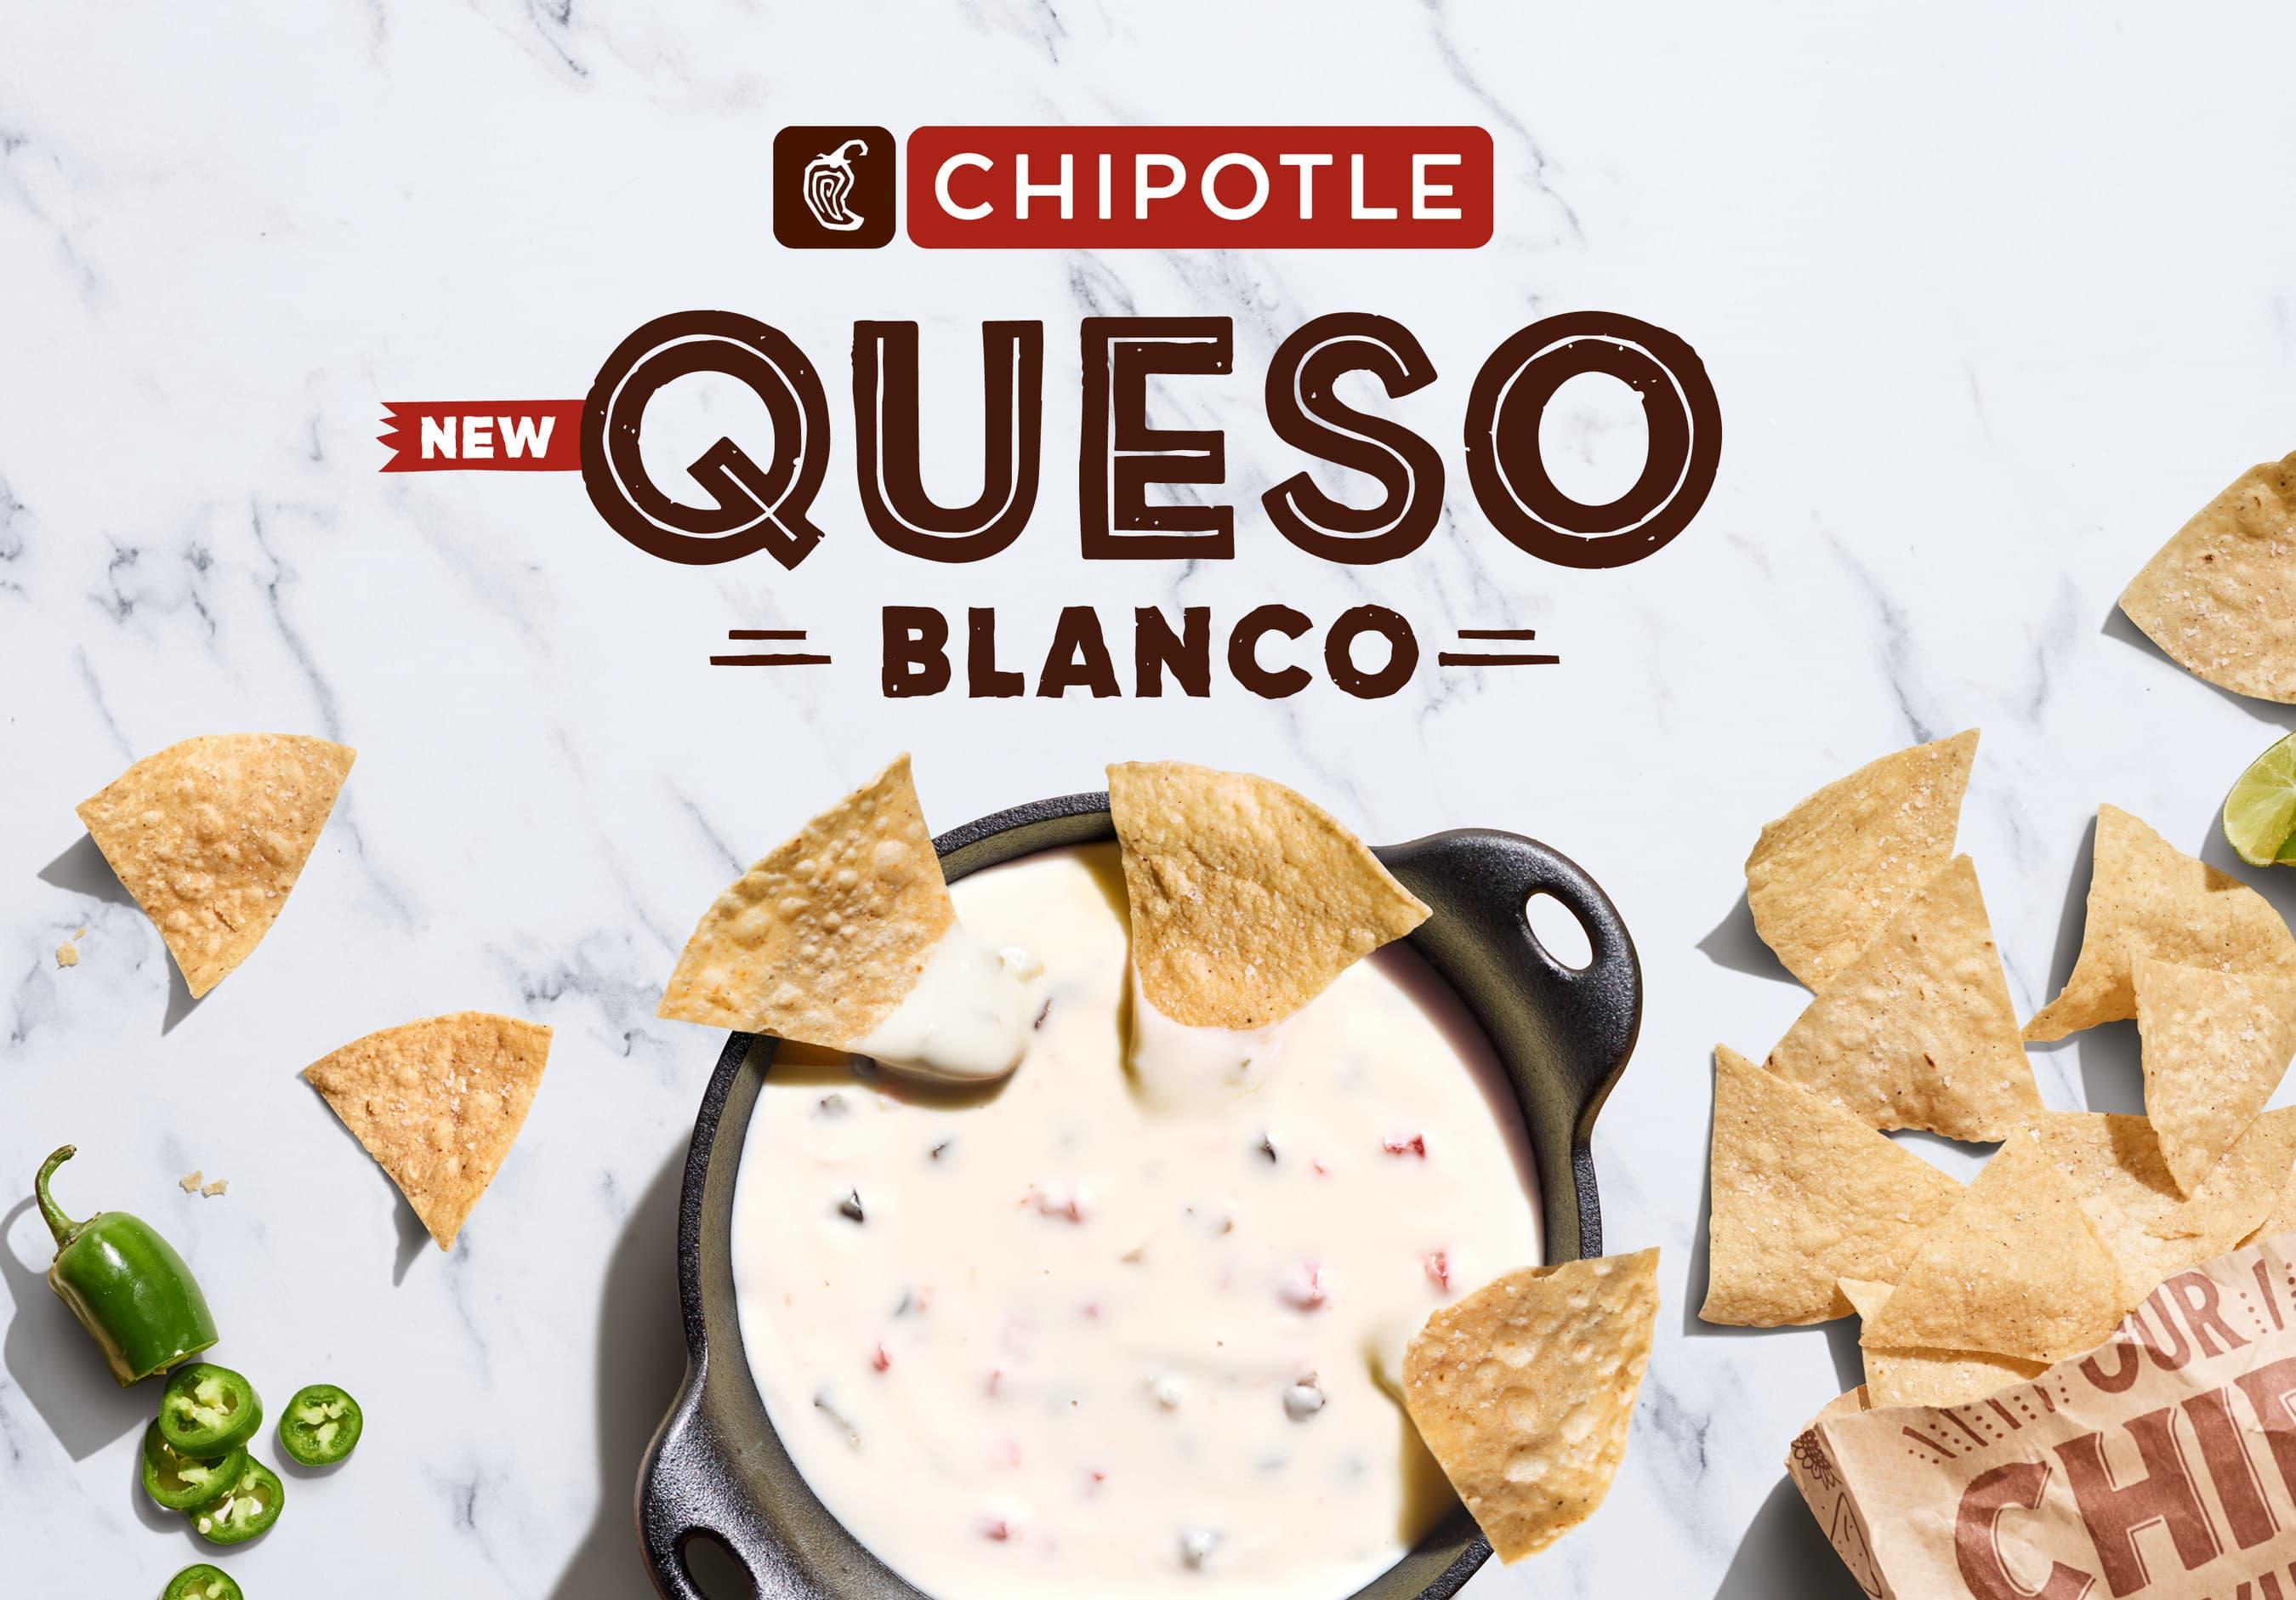 Chipotle Free Queso with Any Entree Purchase